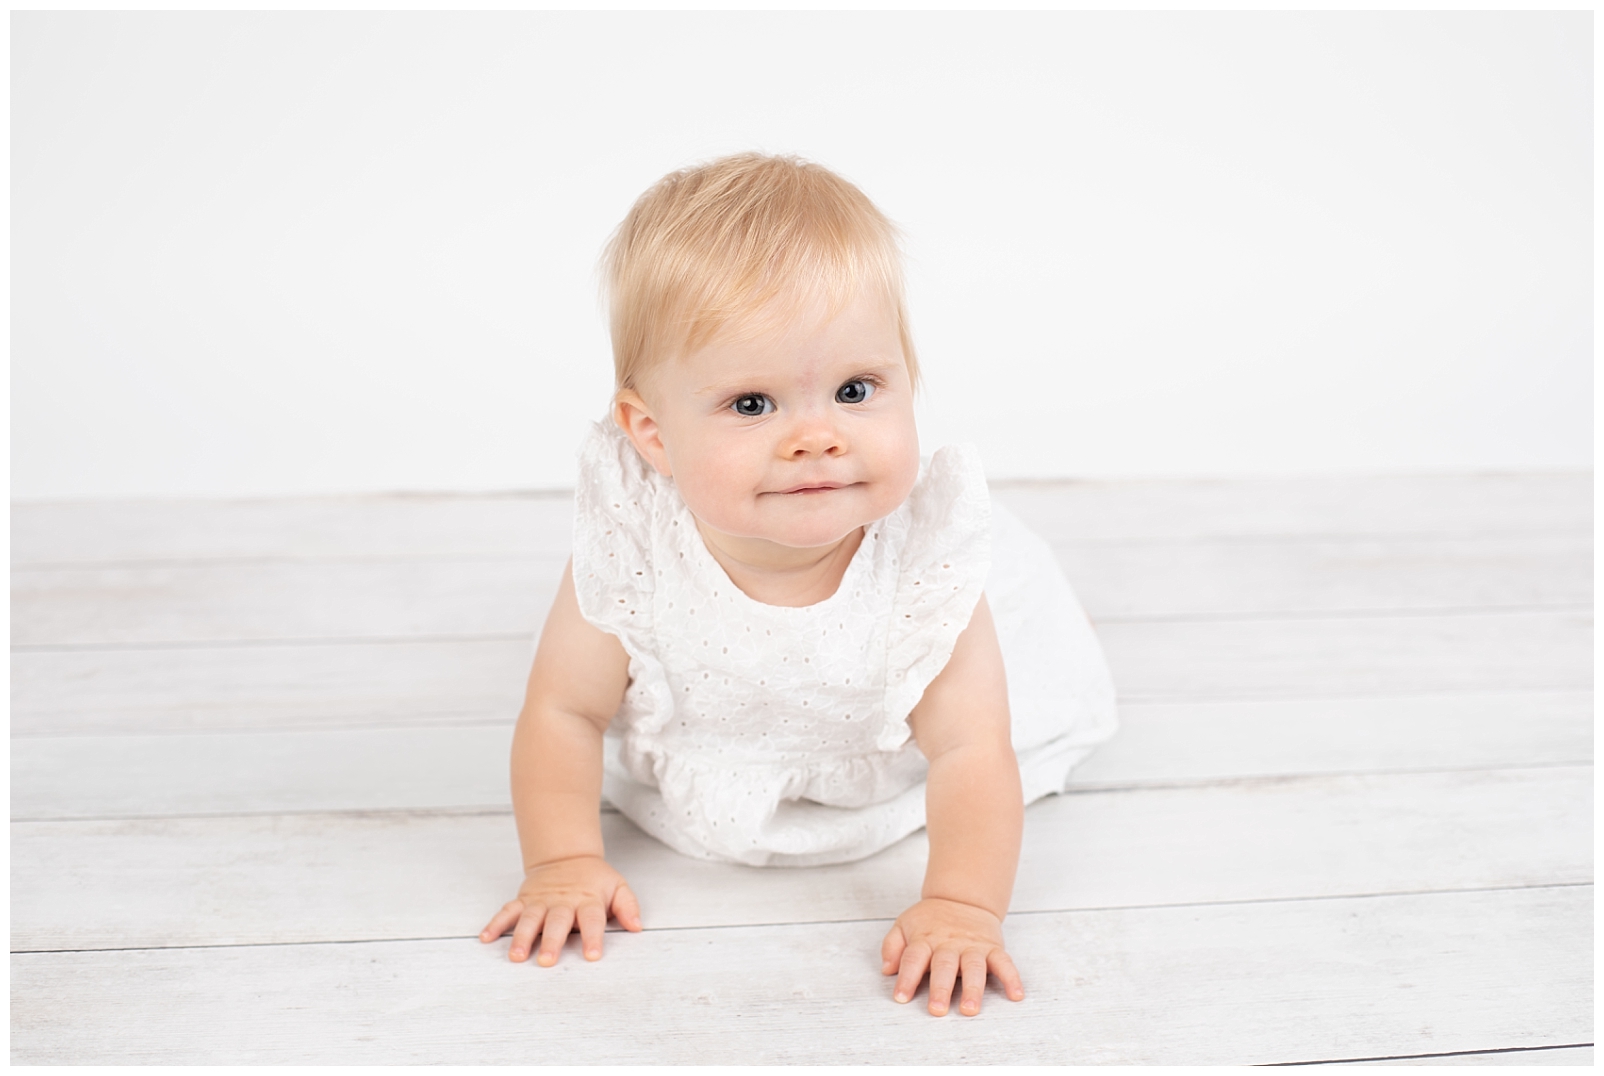 Crawling baby in white dress